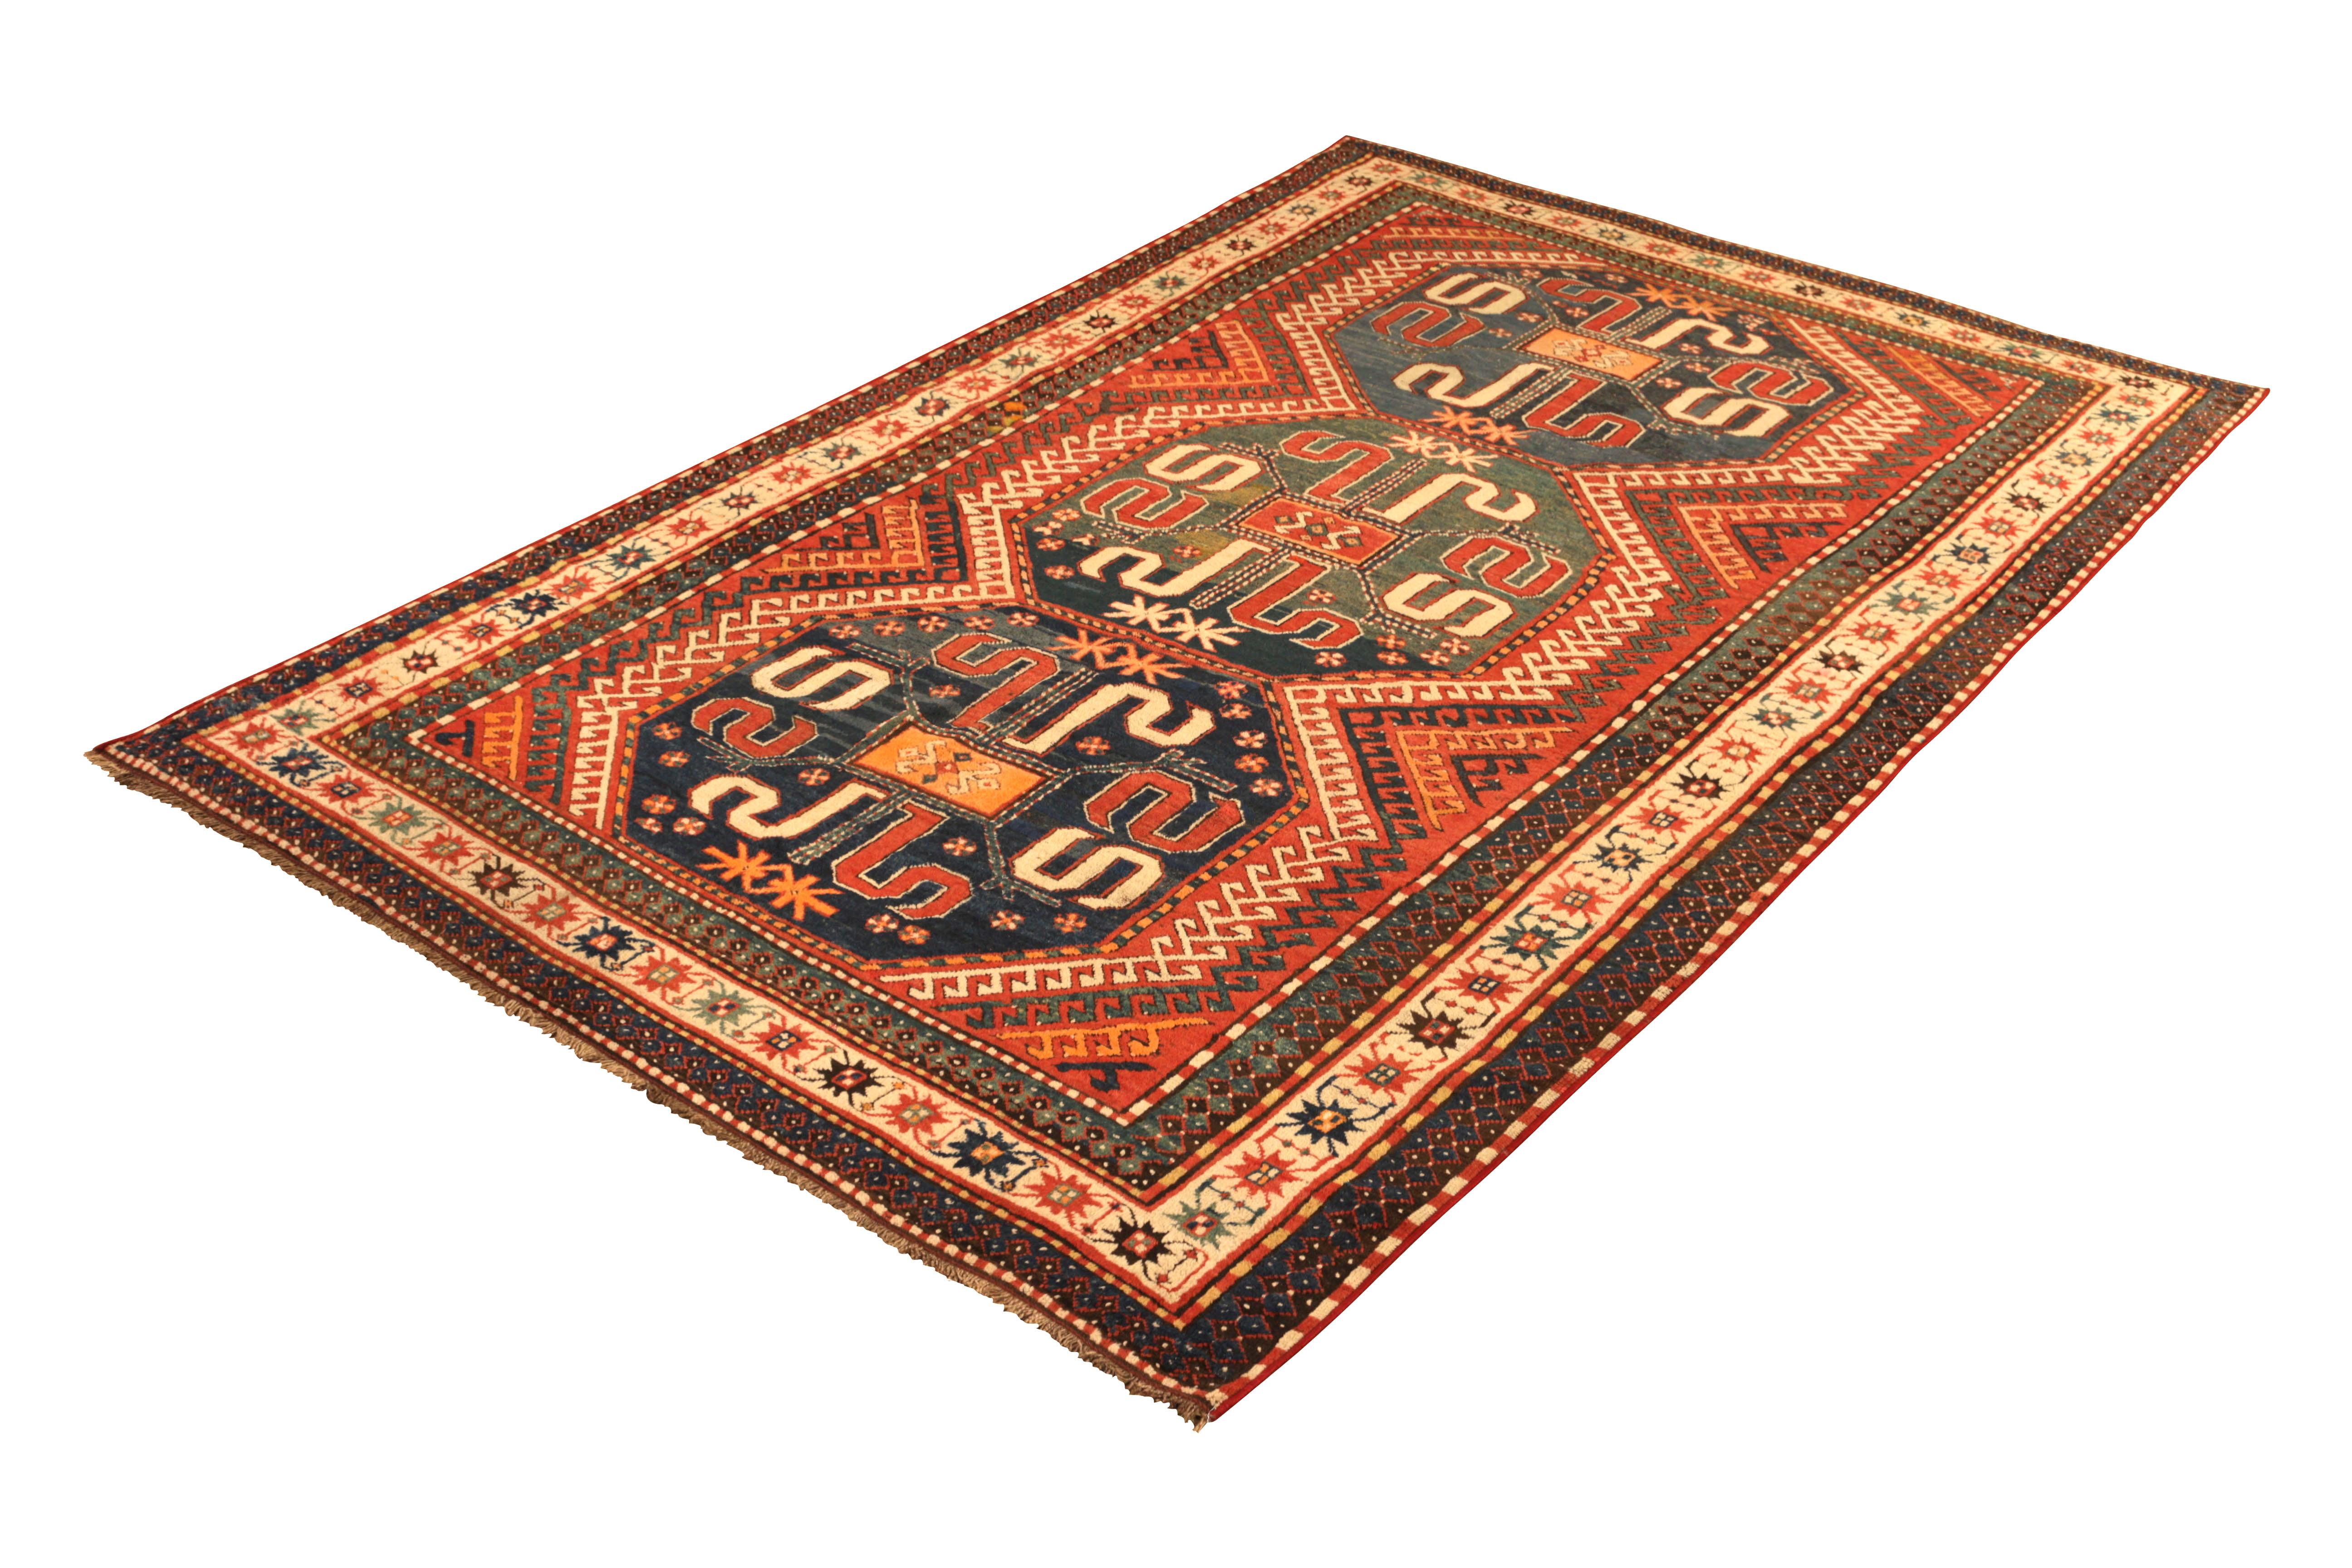 While this hand knotted wool antique rug originates from Russia circa 1910-1920, the Kasai rug design draws its name from the Central African river region of influence in the pattern, as less widely known but remarkable tribal rug family with